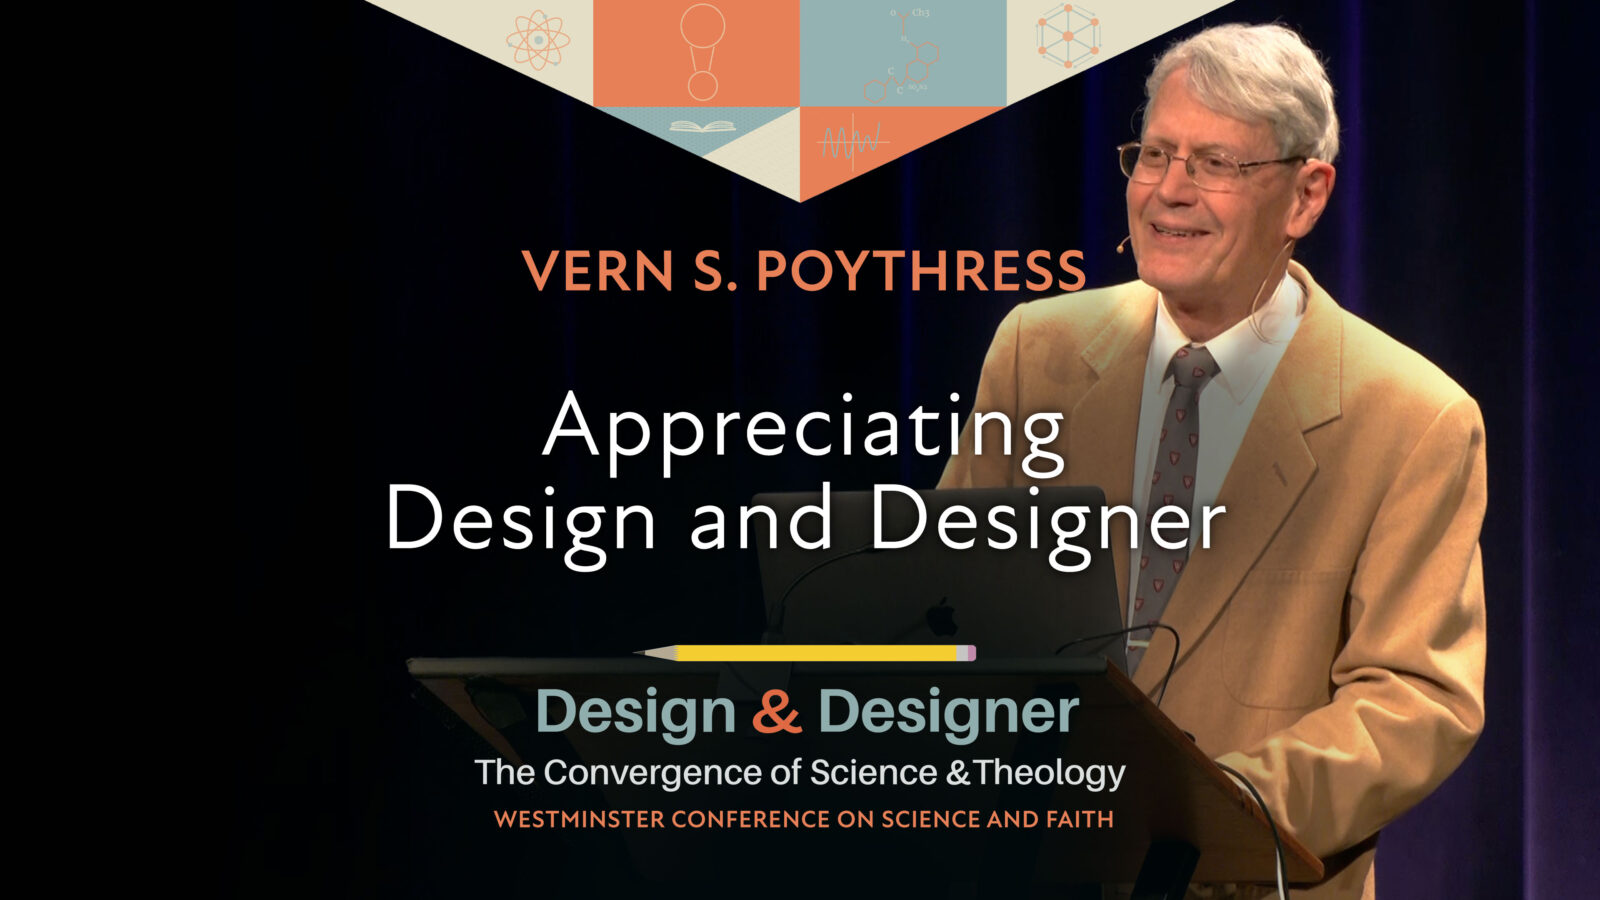 Vern S. Poythress at 2022 Westminster Conference on Science and Faith